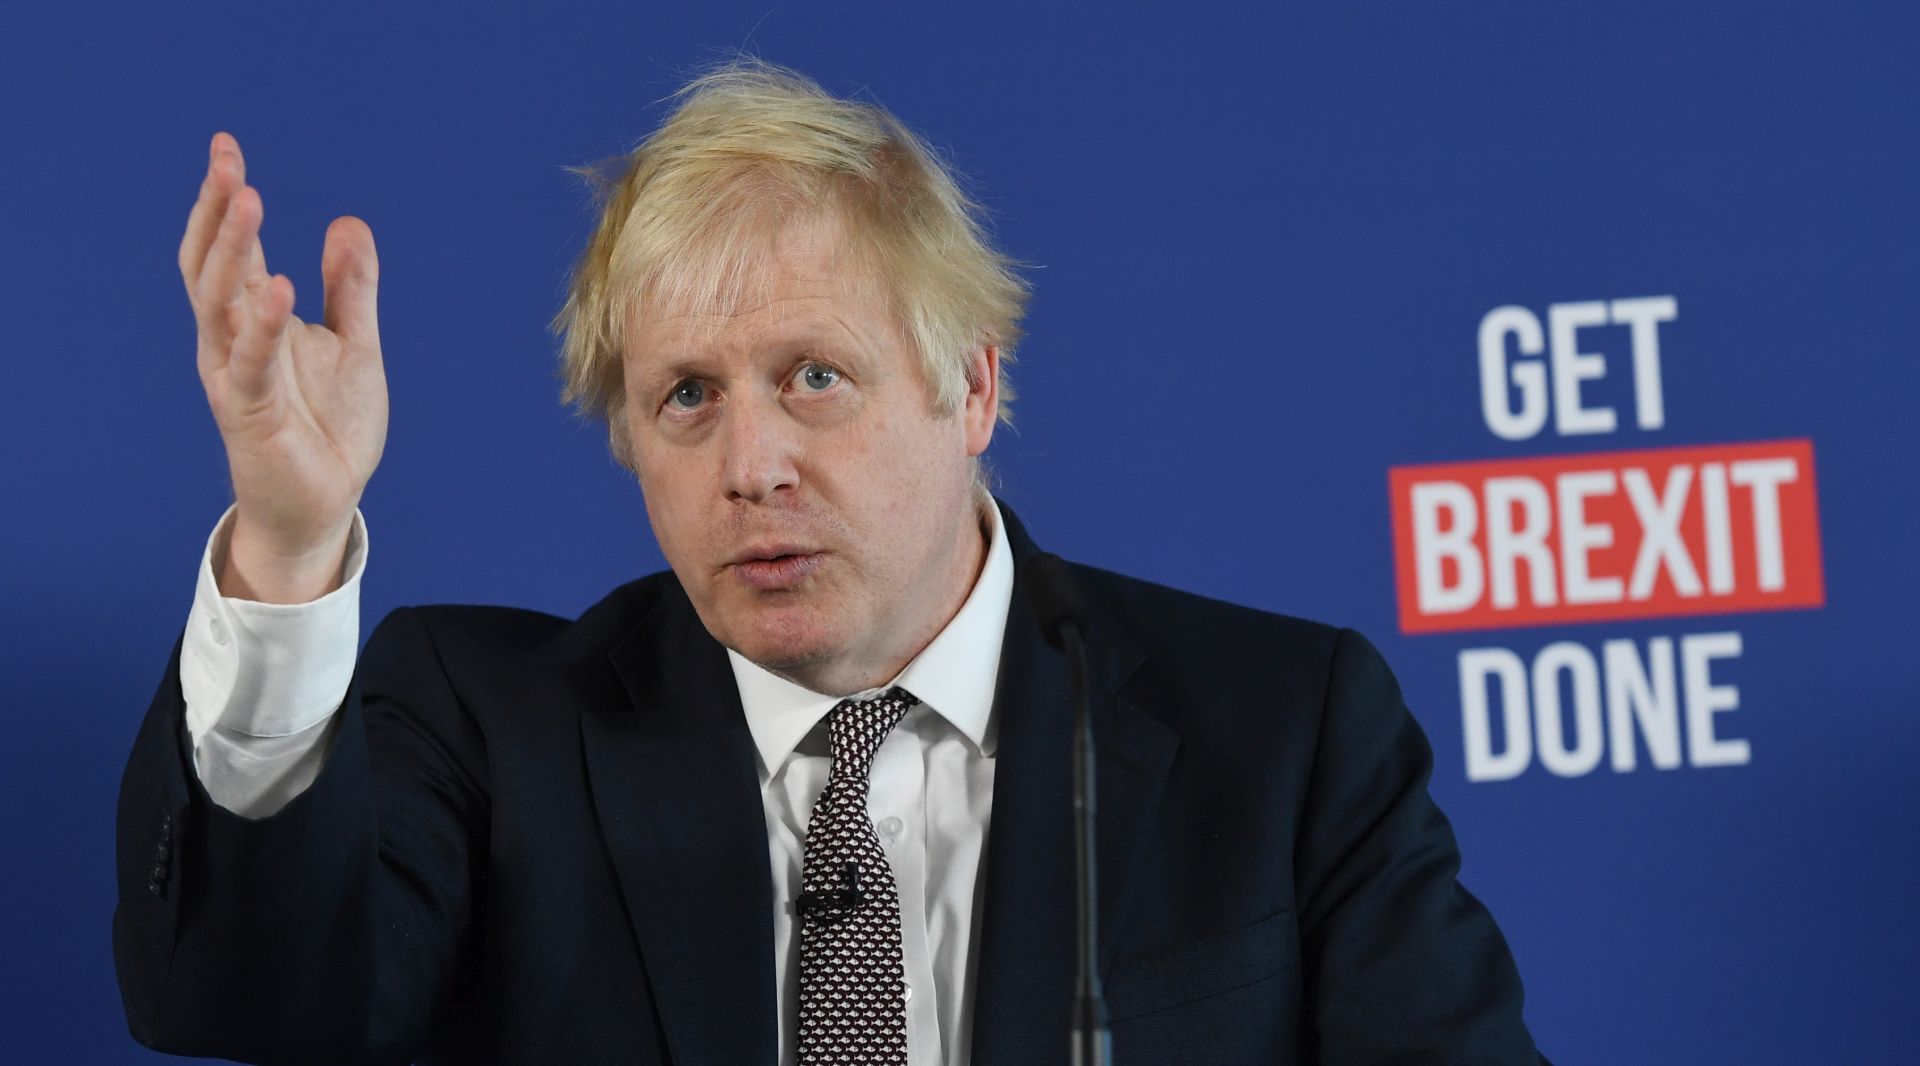 epa08032788 Britain's Prime Minister and Conservative leader Boris Johnson takes part in a press conference about Brexit and the general election in London, Britain, 29 November 2019.  EPA/FACUNDO ARRIZABALAGA